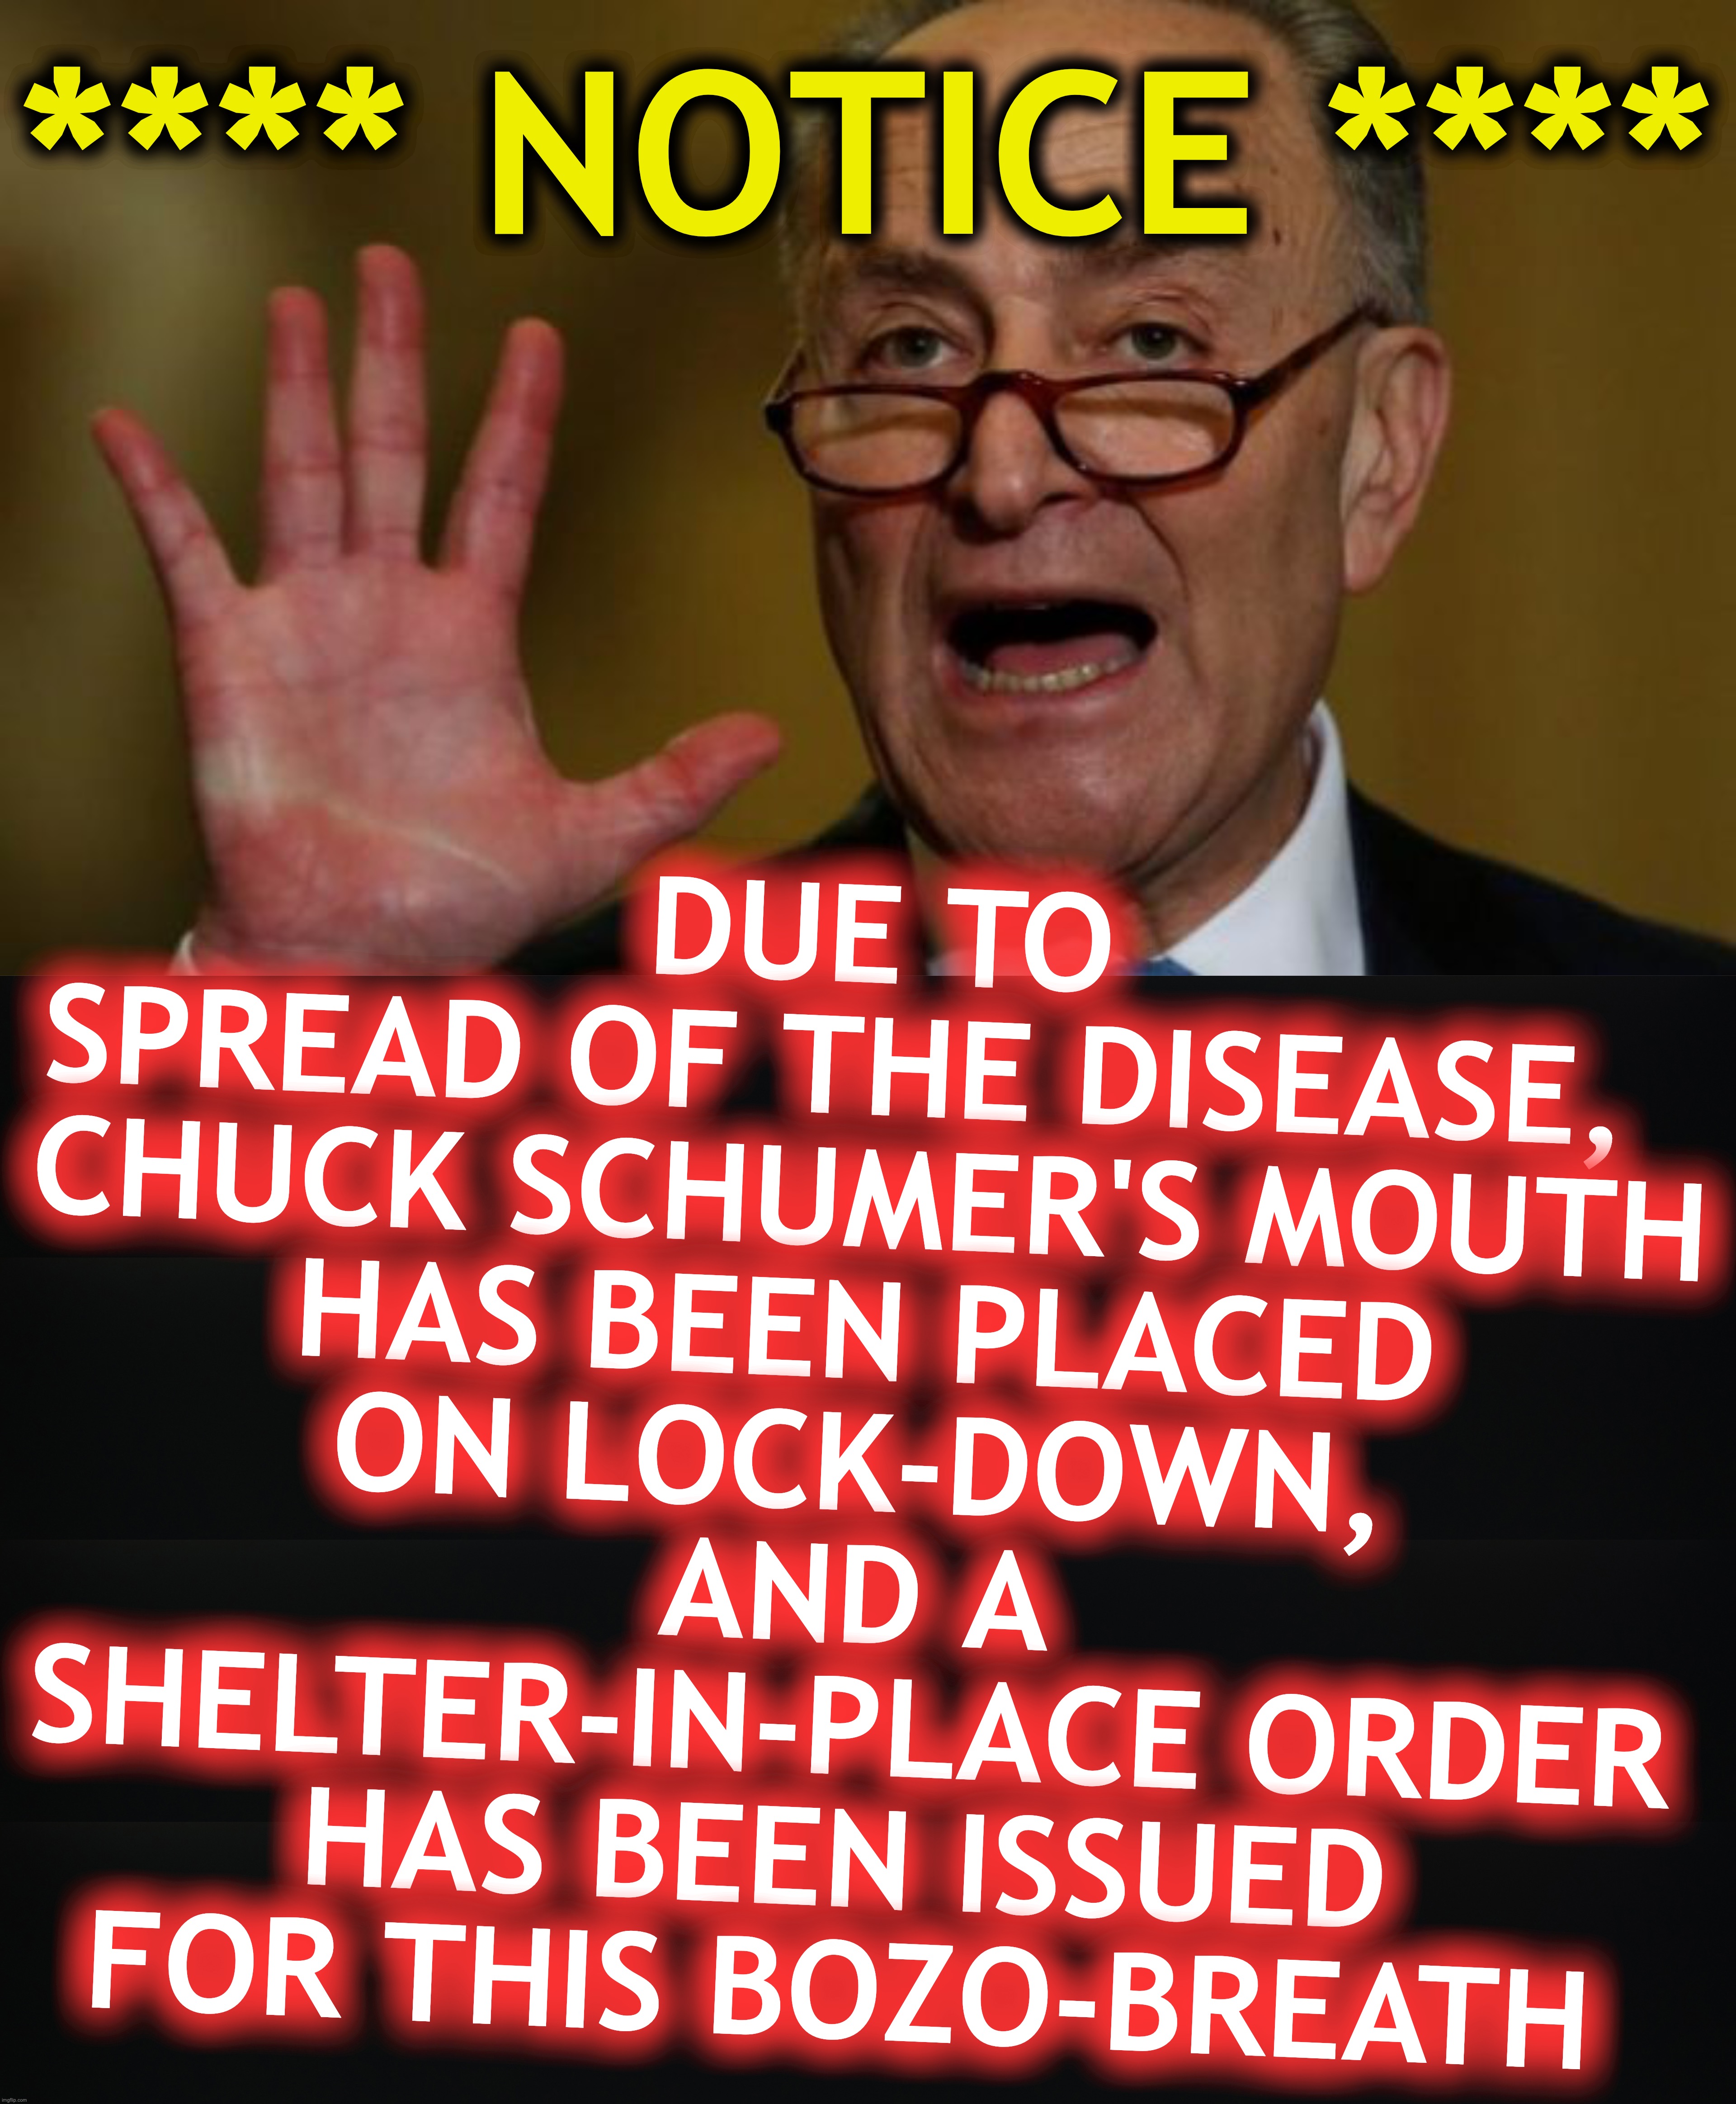 DUE TO SPREAD OF THE DISEASE,  

CHUCK SCHUMER'S MOUTH HAS BEEN PLACED ON LOCK-DOWN, AND A SHELTER-IN-PLACE ORDER HAS BEEN ISSUED FOR THIS BOZO-BREATH; **** NOTICE **** | image tagged in chuck schumer,coronavirus,corona,lockdown | made w/ Imgflip meme maker